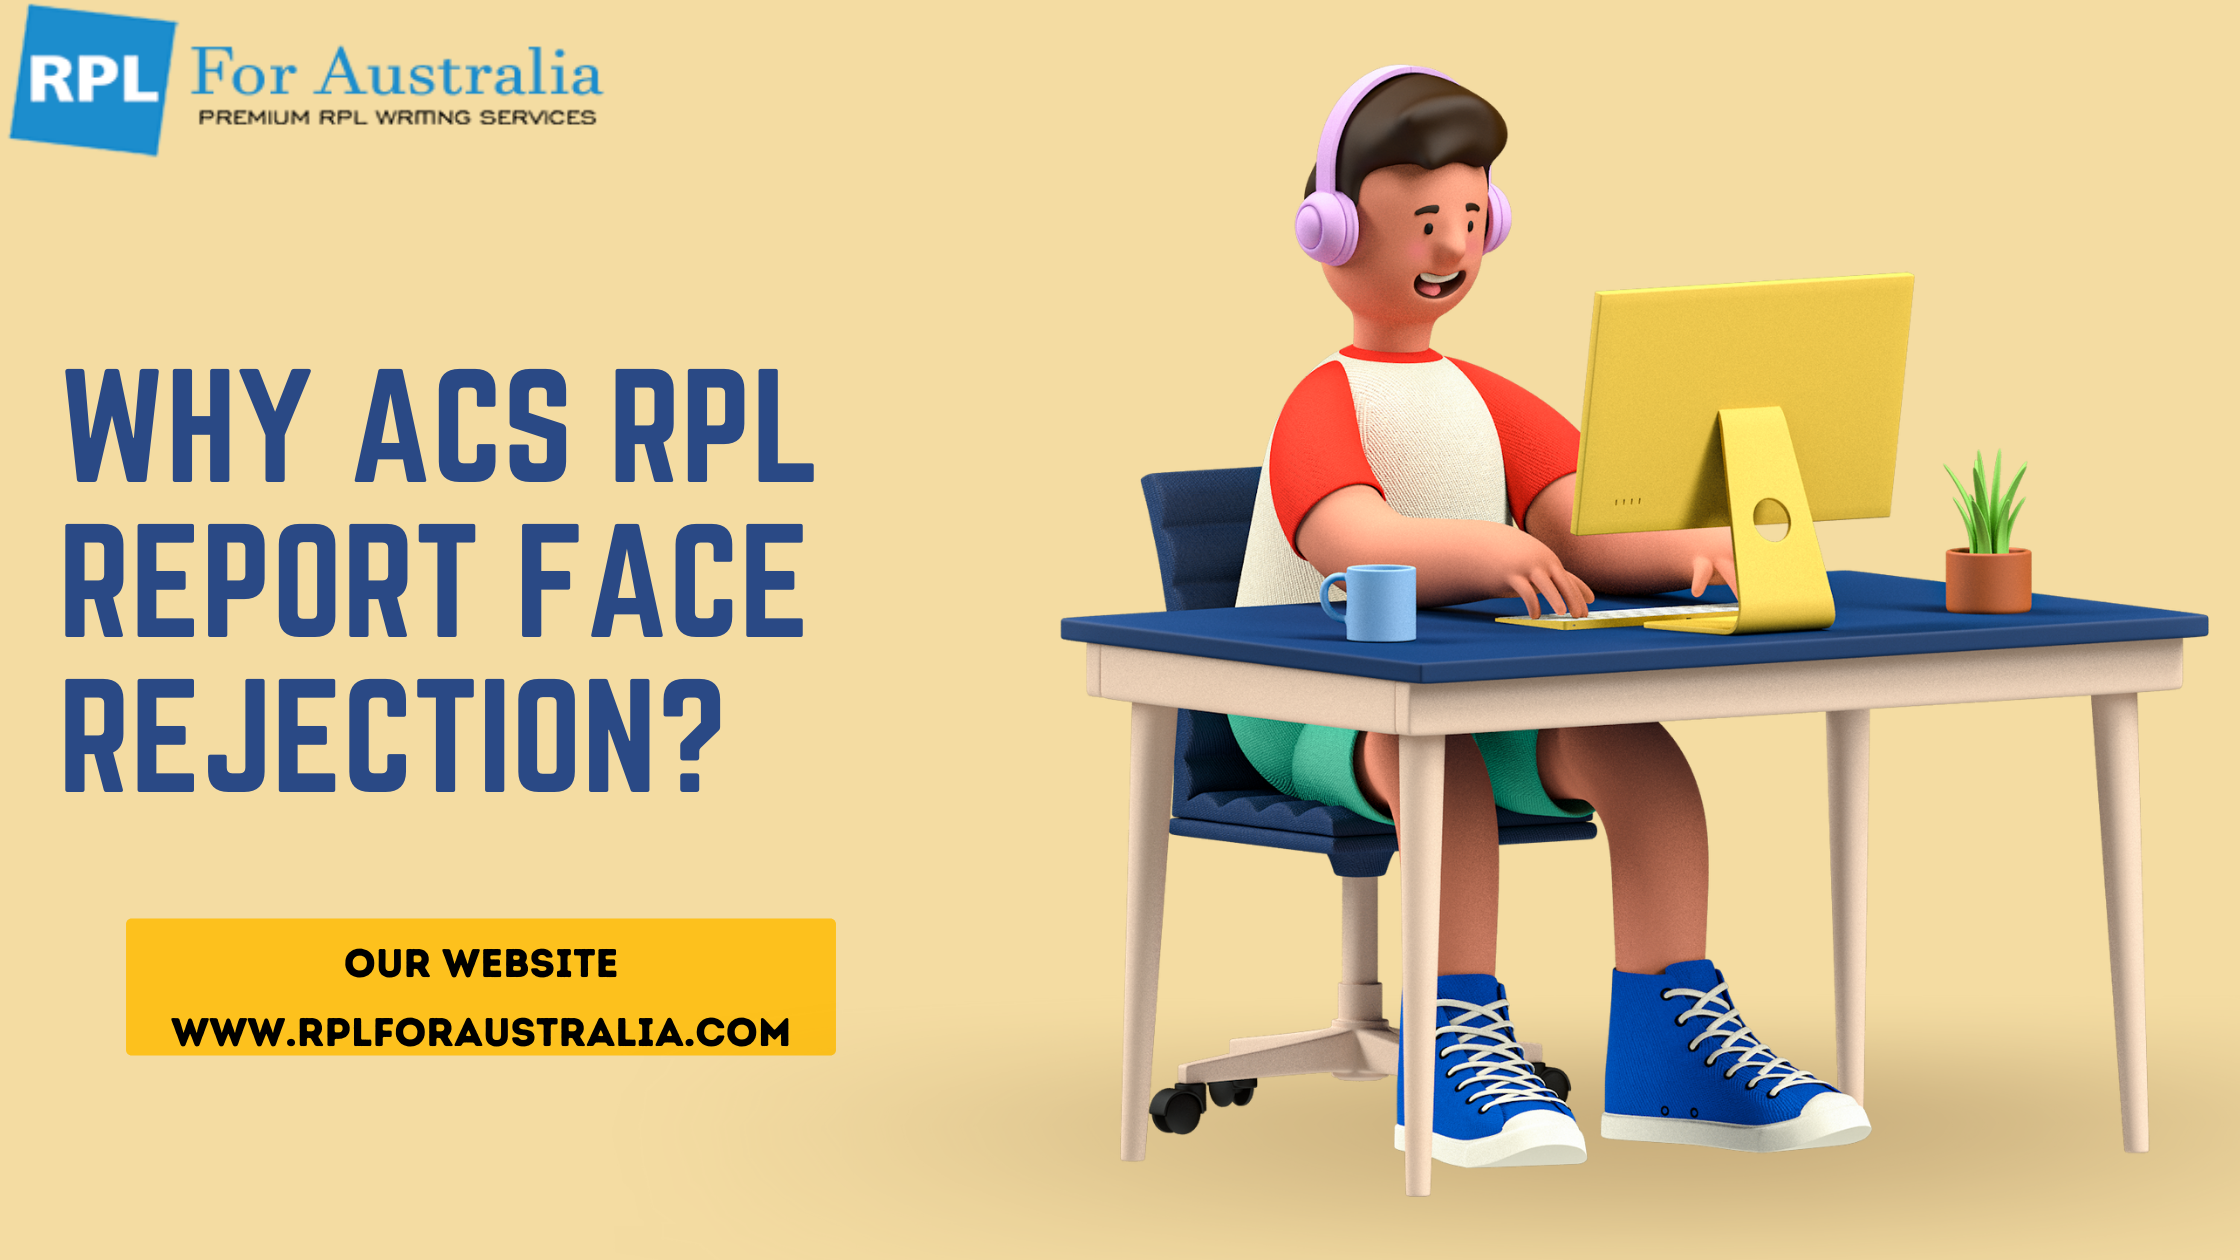 Why ACS RPL Reports Face Rejection?